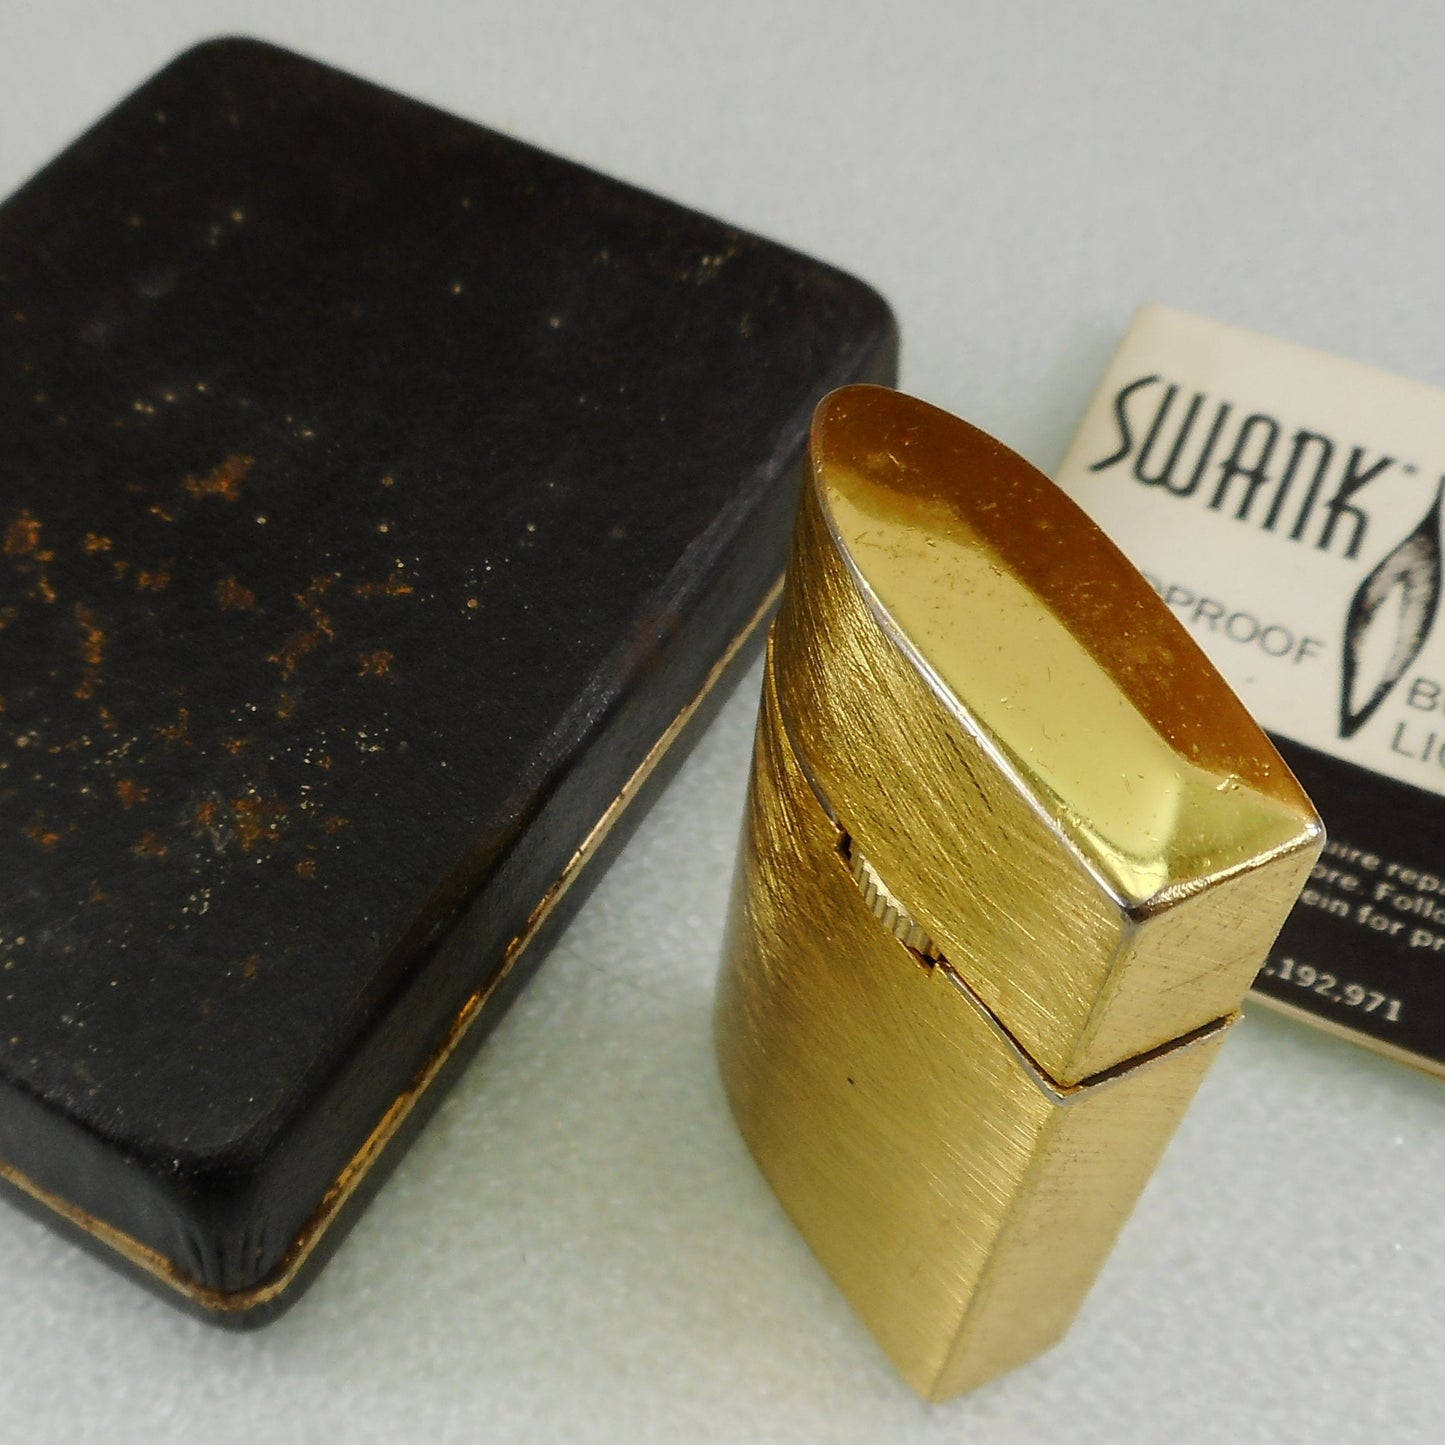 Swank J2 Windproof Butane Lighter with Case Papers  - Brushed Gold Tone Japan